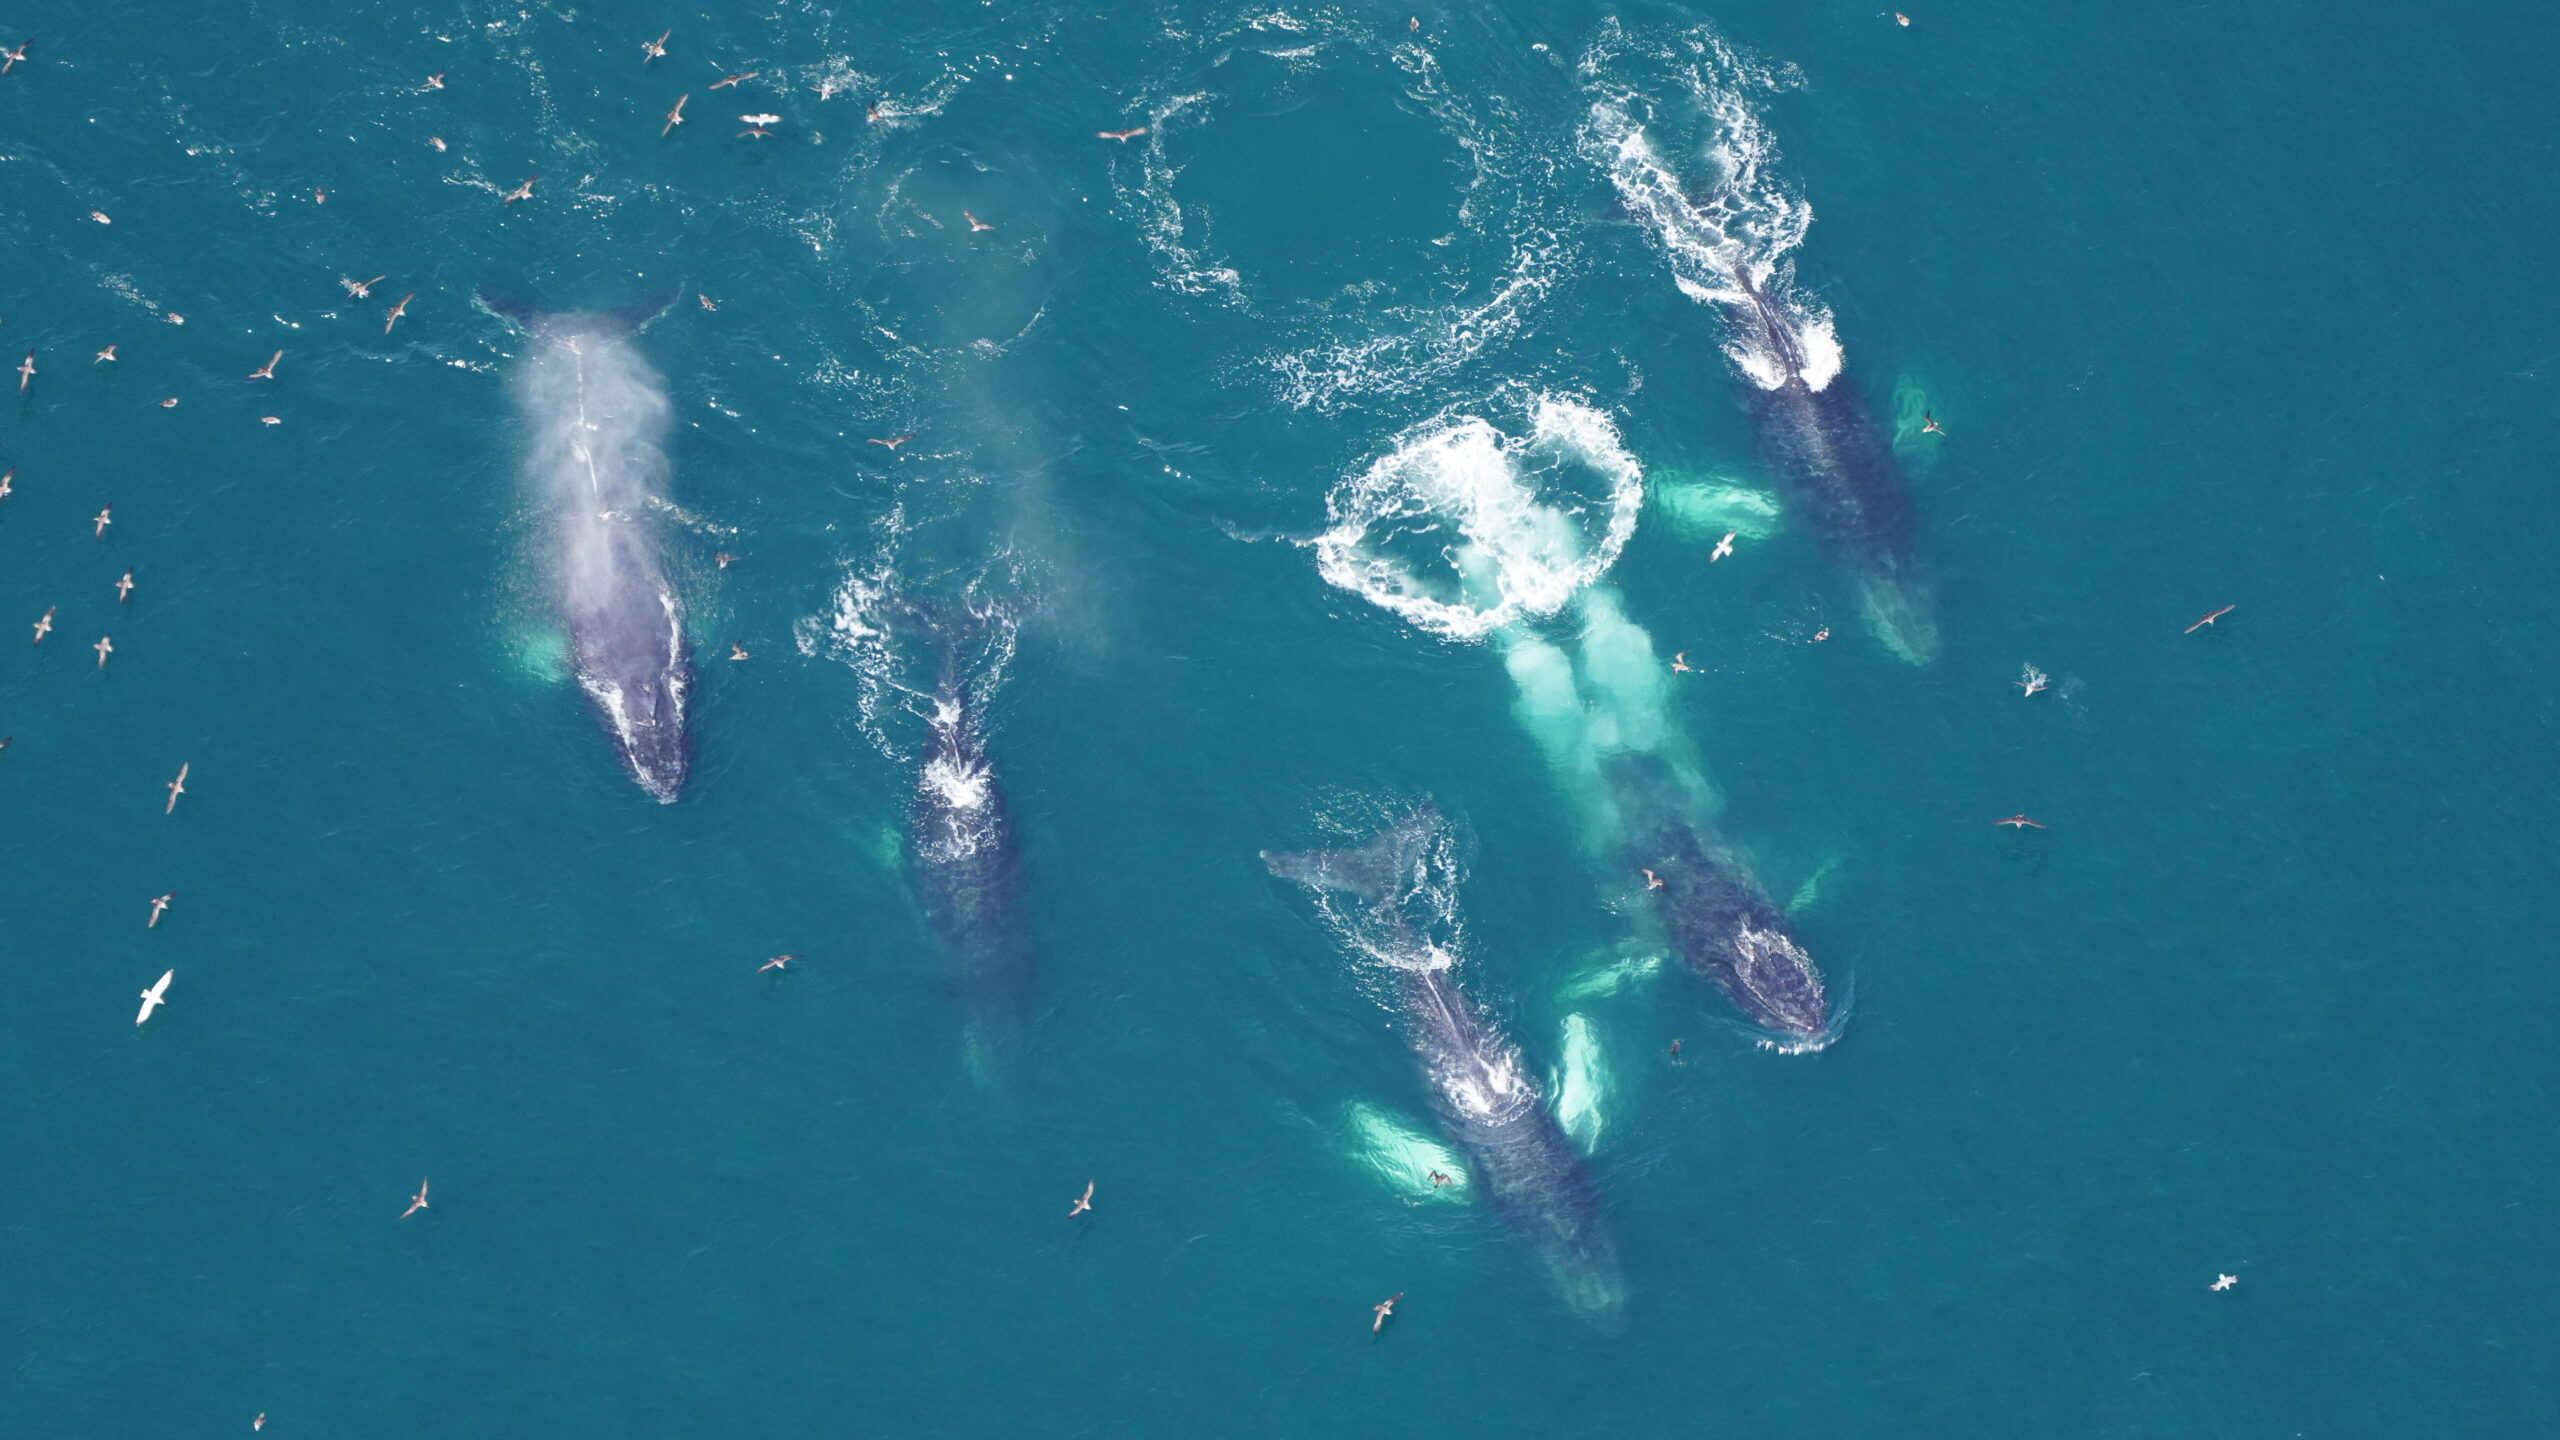 Humpback whales traveling at the surface